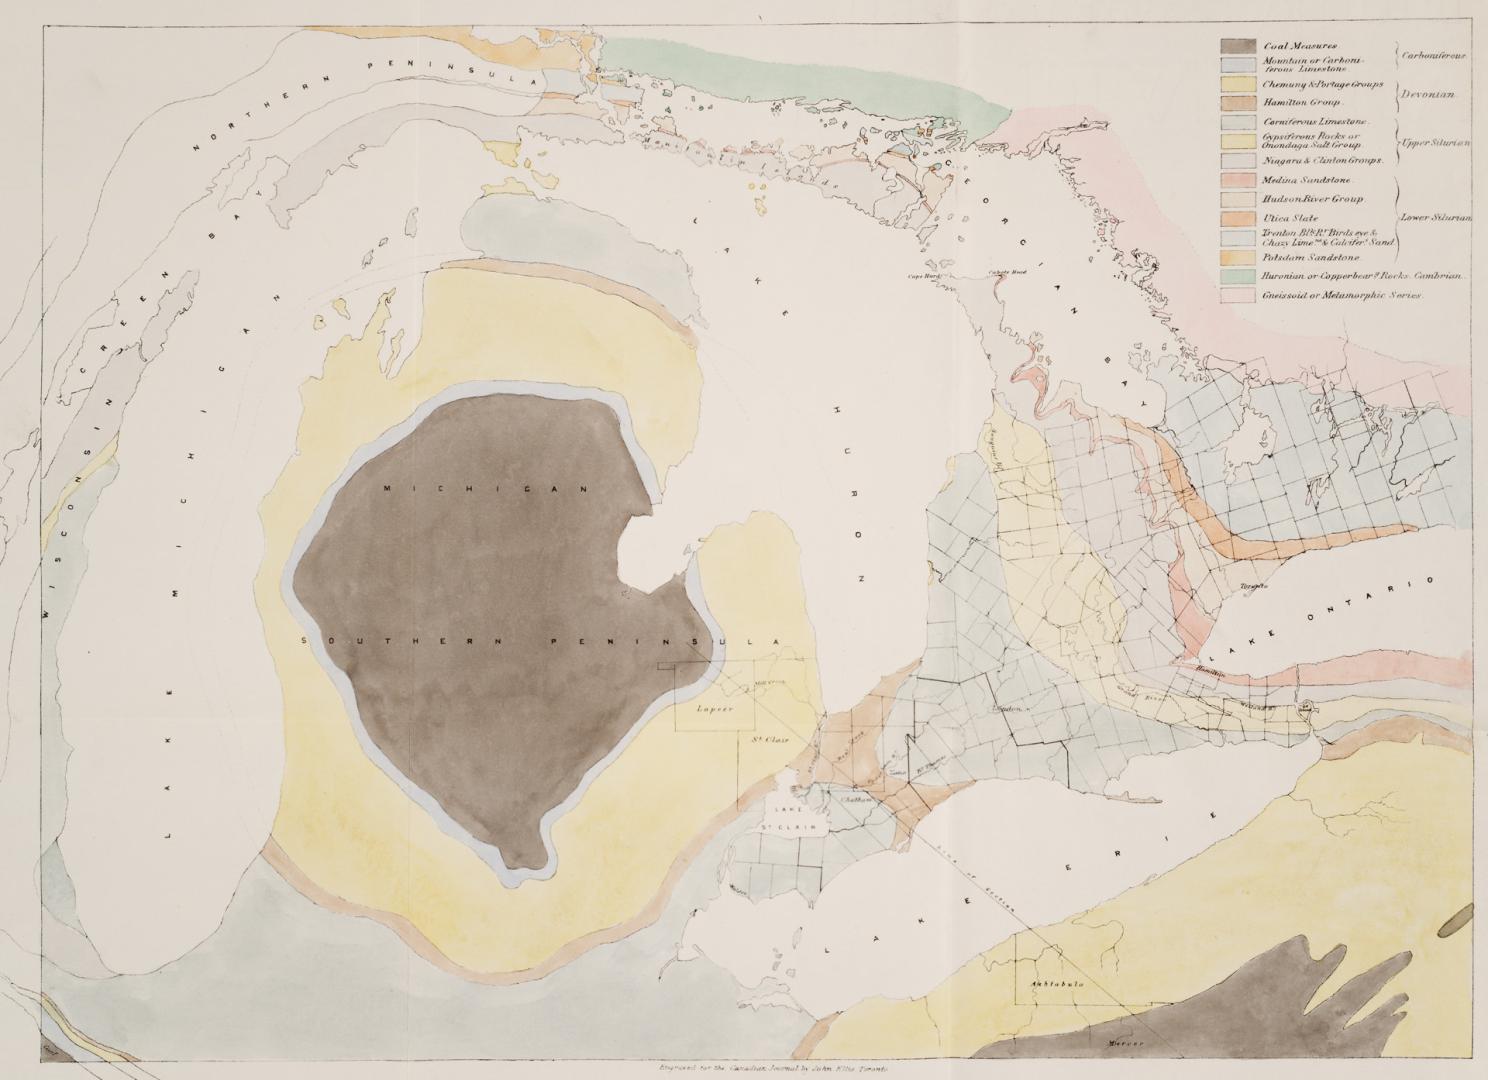 Geological map engraved for the Canadian Journal by John Ellis Toronto